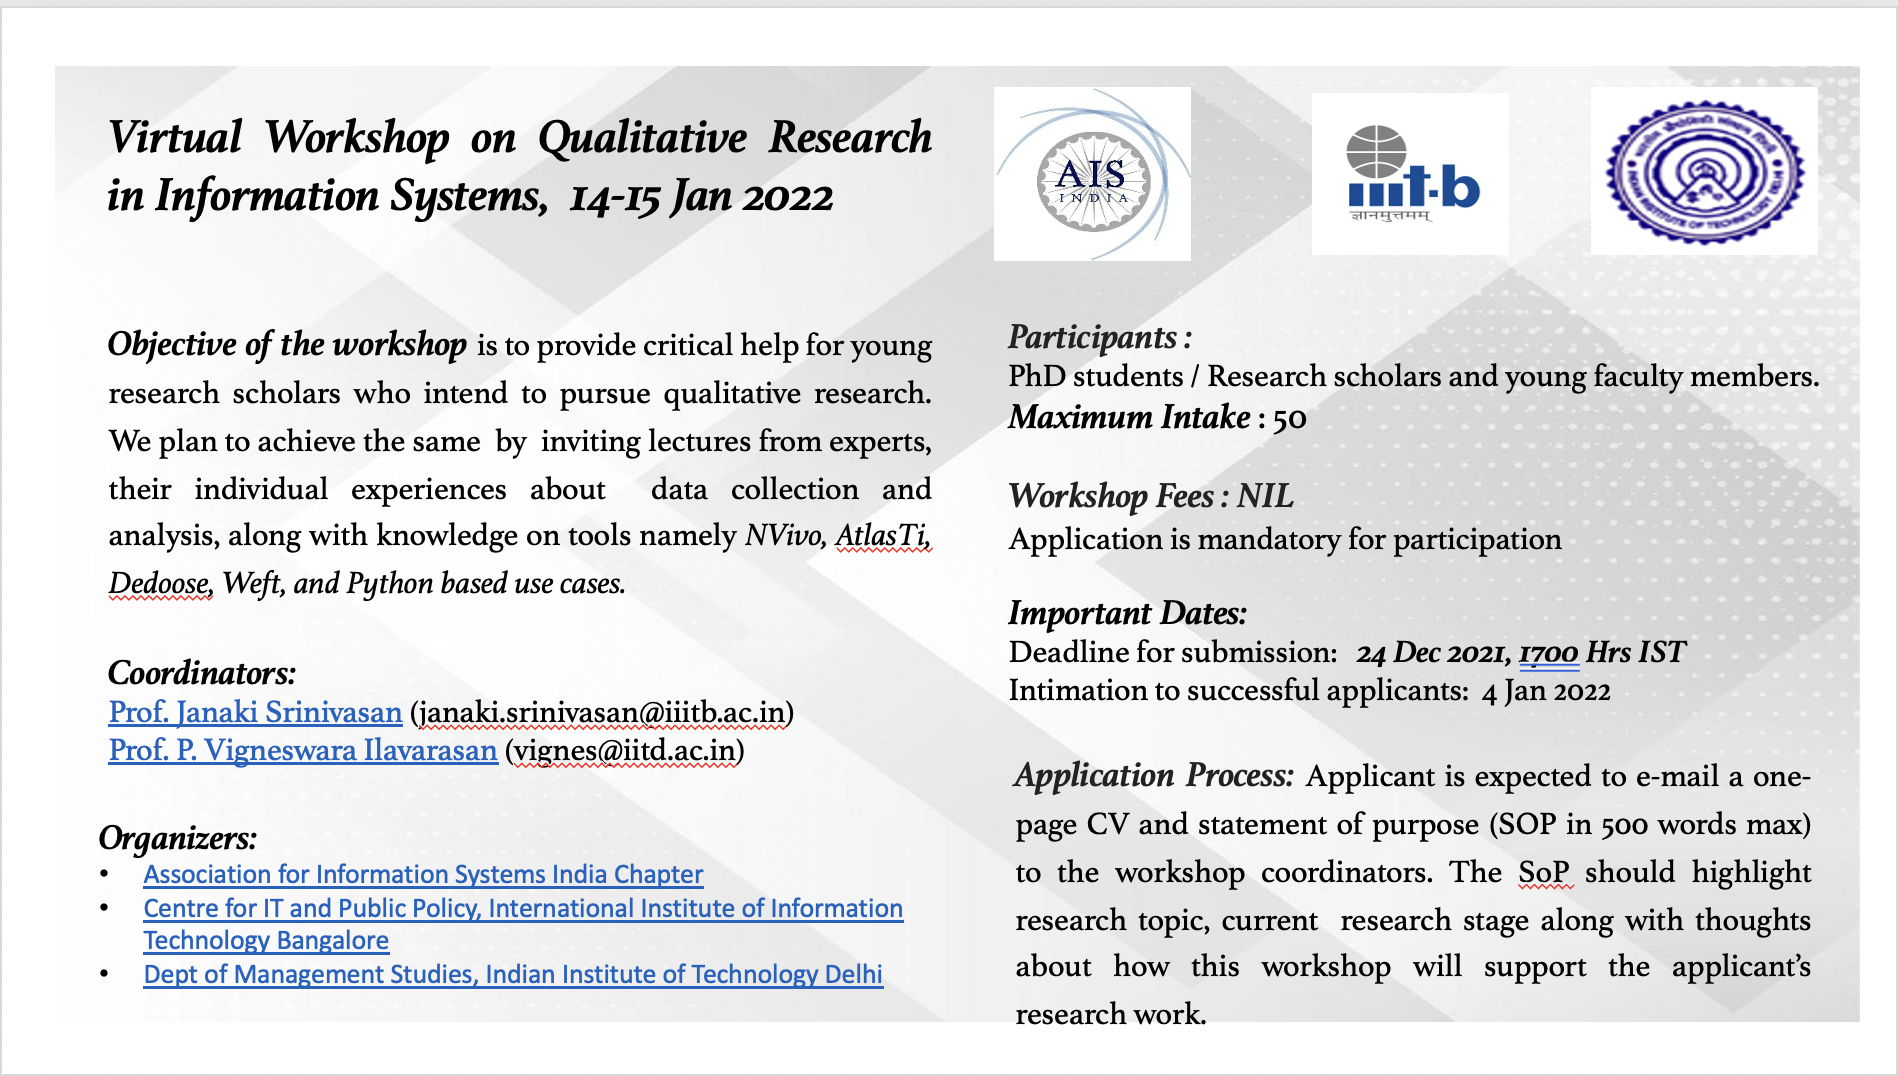 Virtual Workshop on Qualitative Research in Information Systems